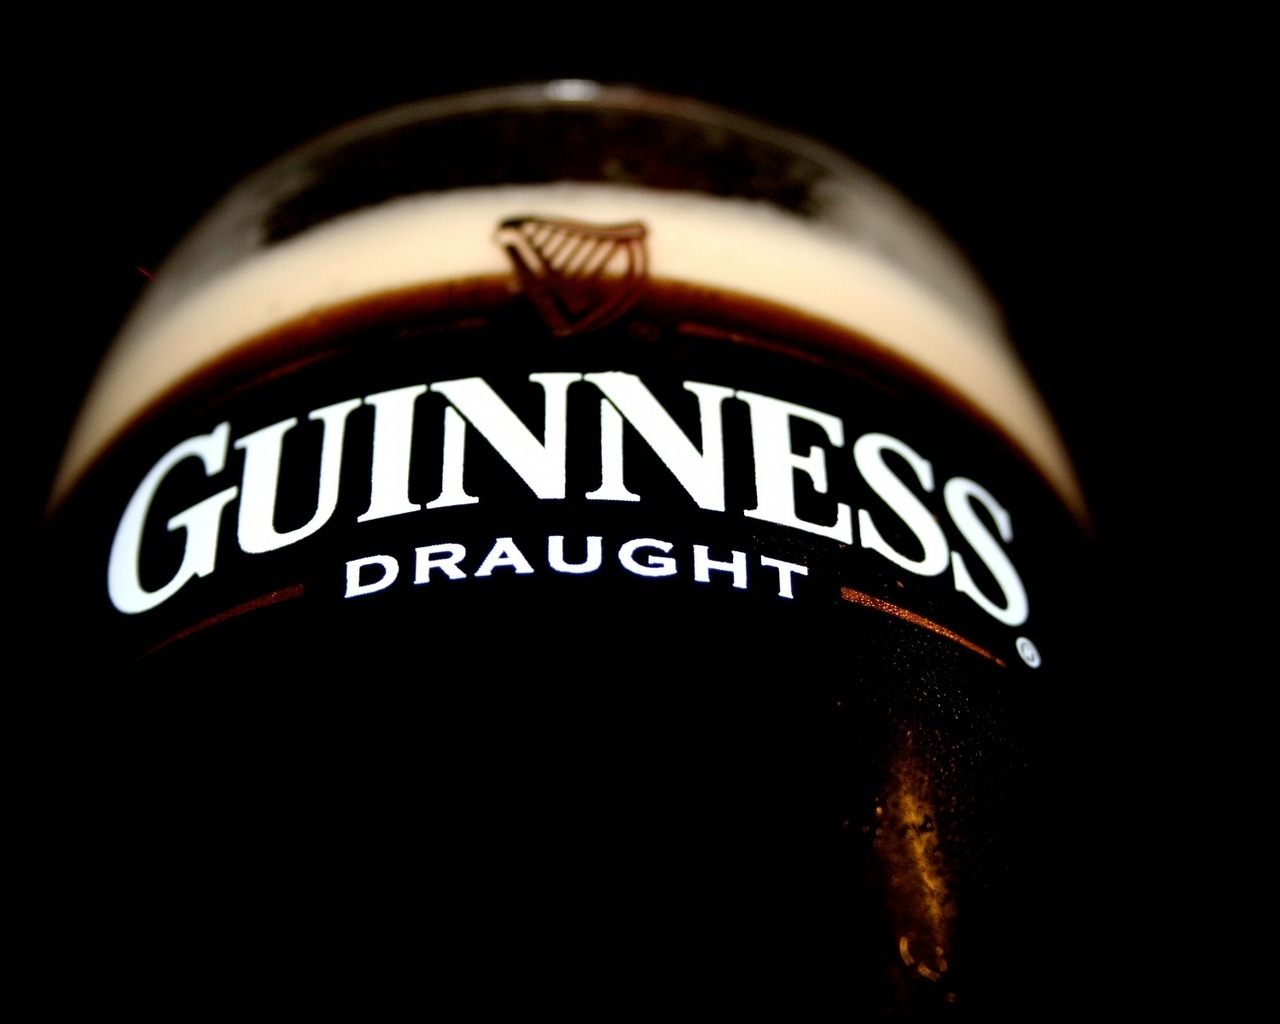 Guiness Beer for 1280 x 1024 resolution